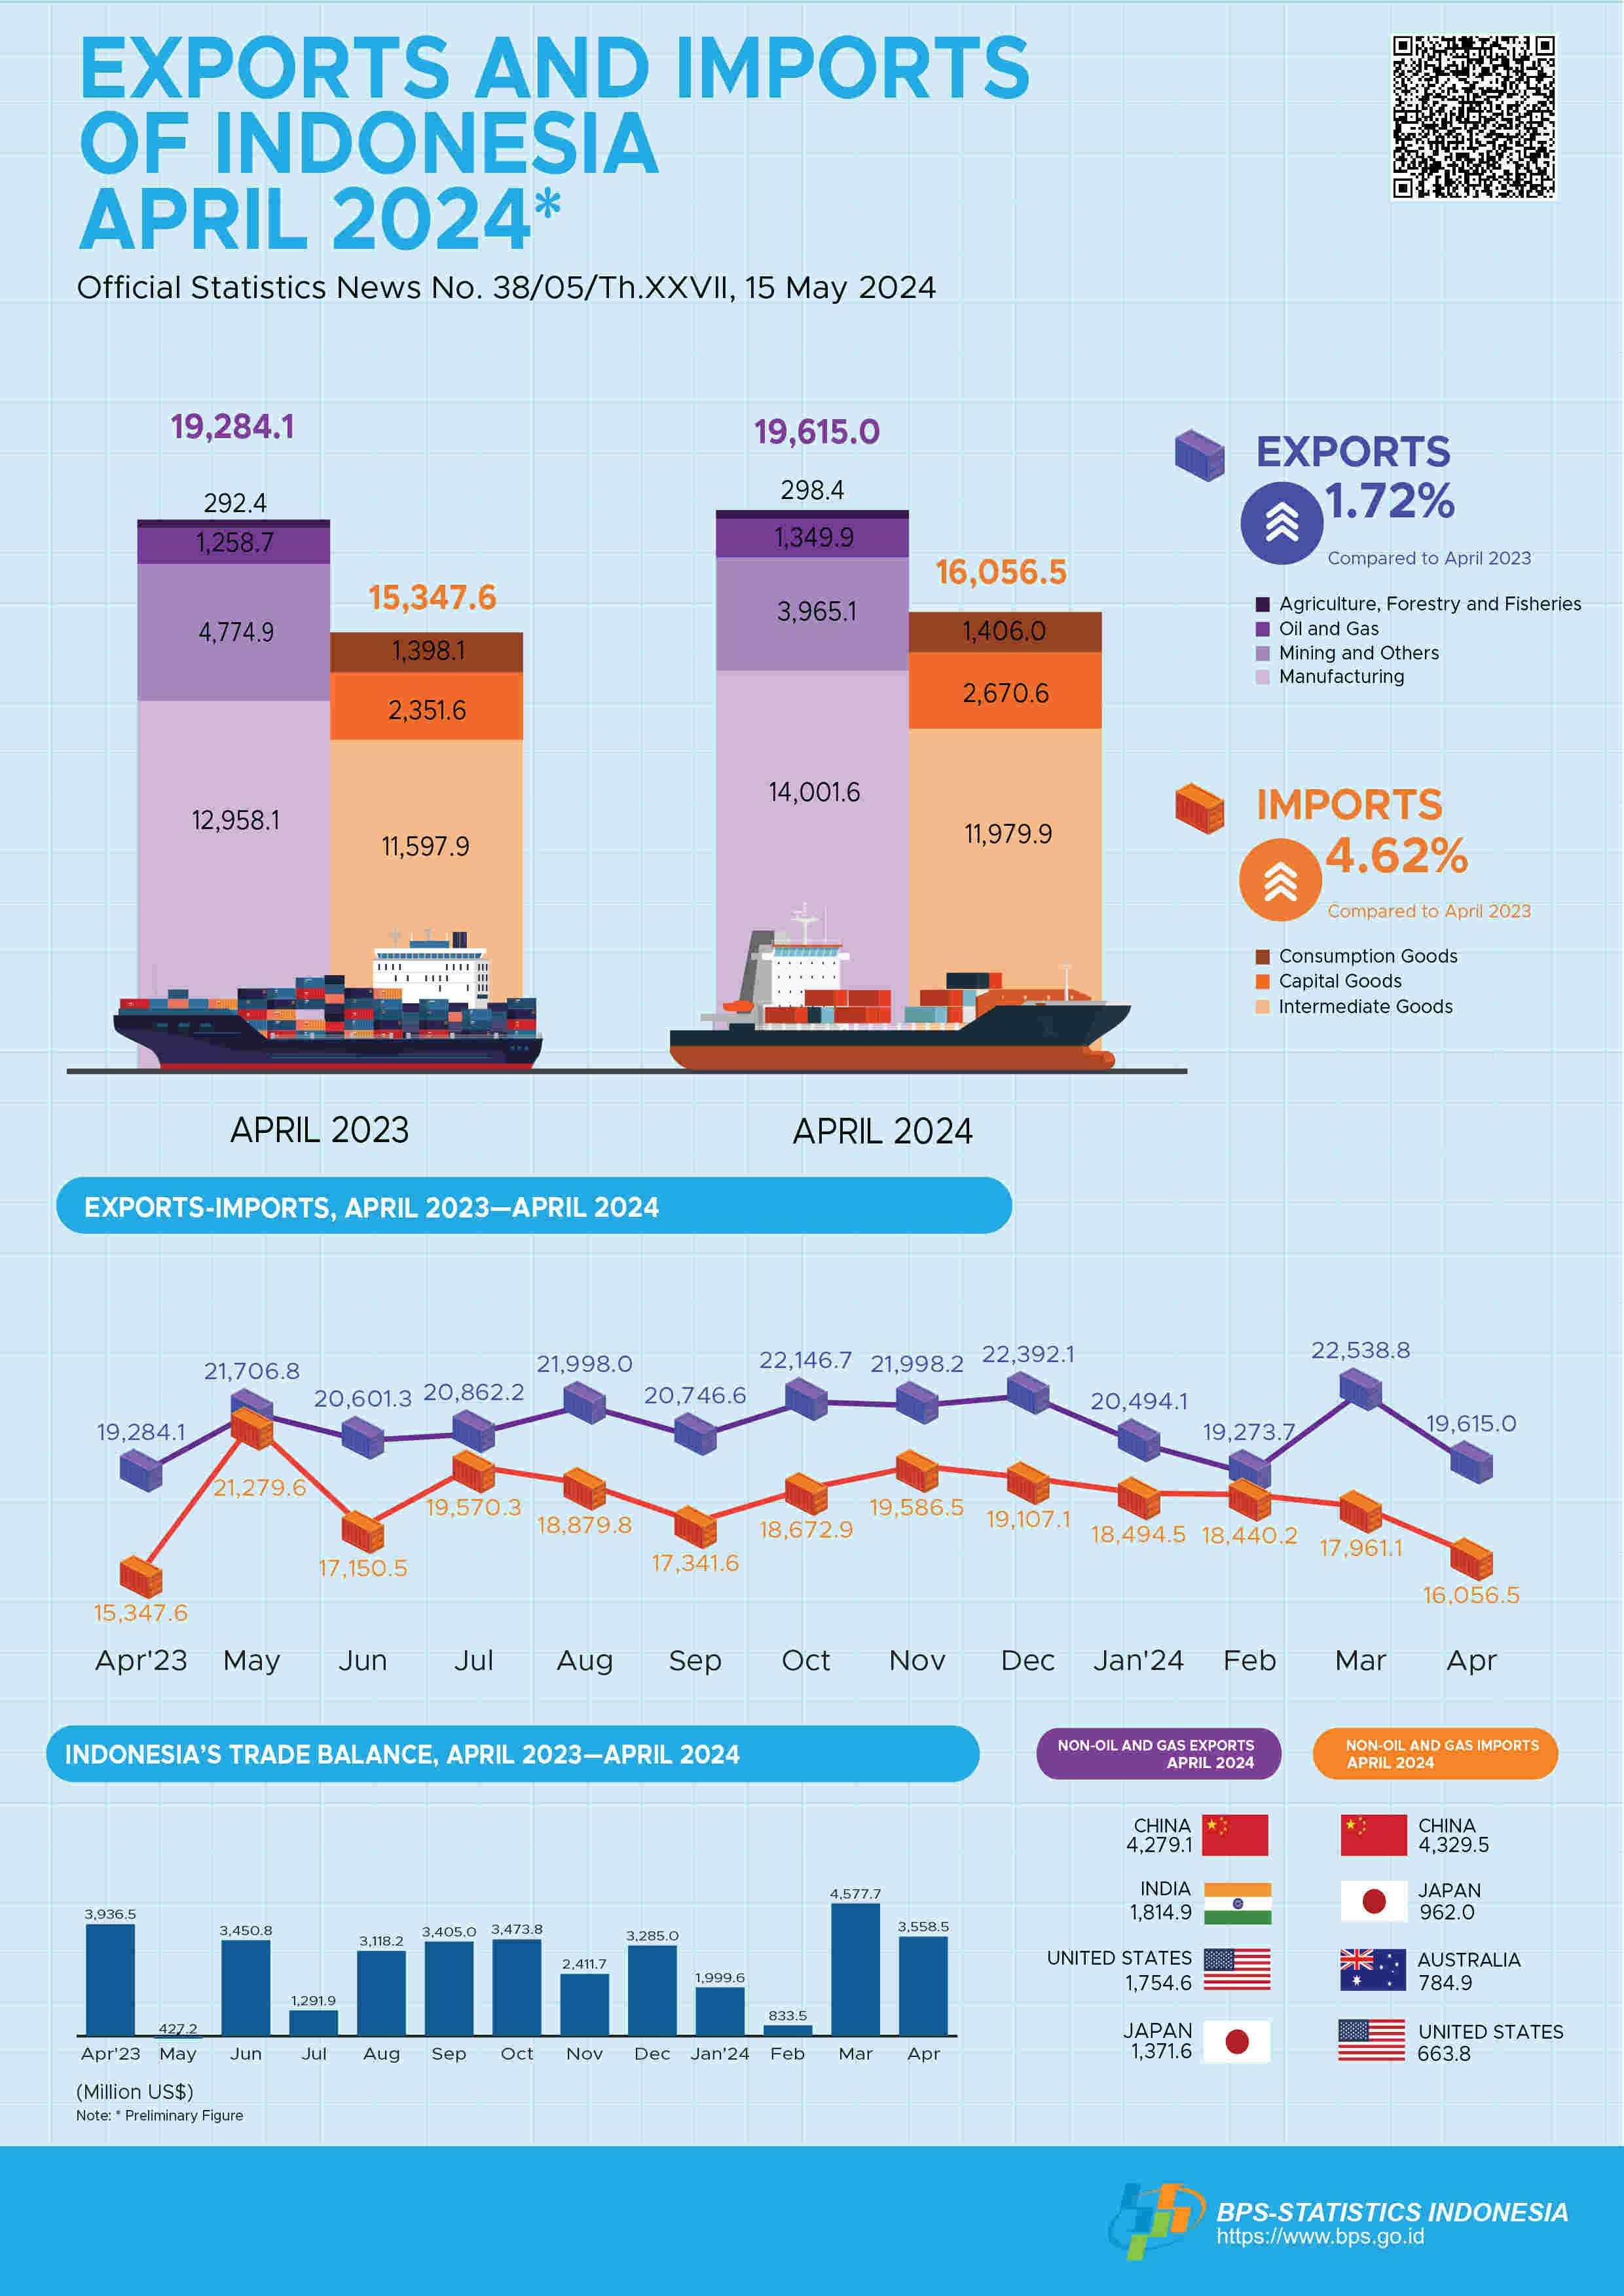 Exports in April 2024 reached US$19.62 billion. Imports in April 2024 reached US$16.06 billion.